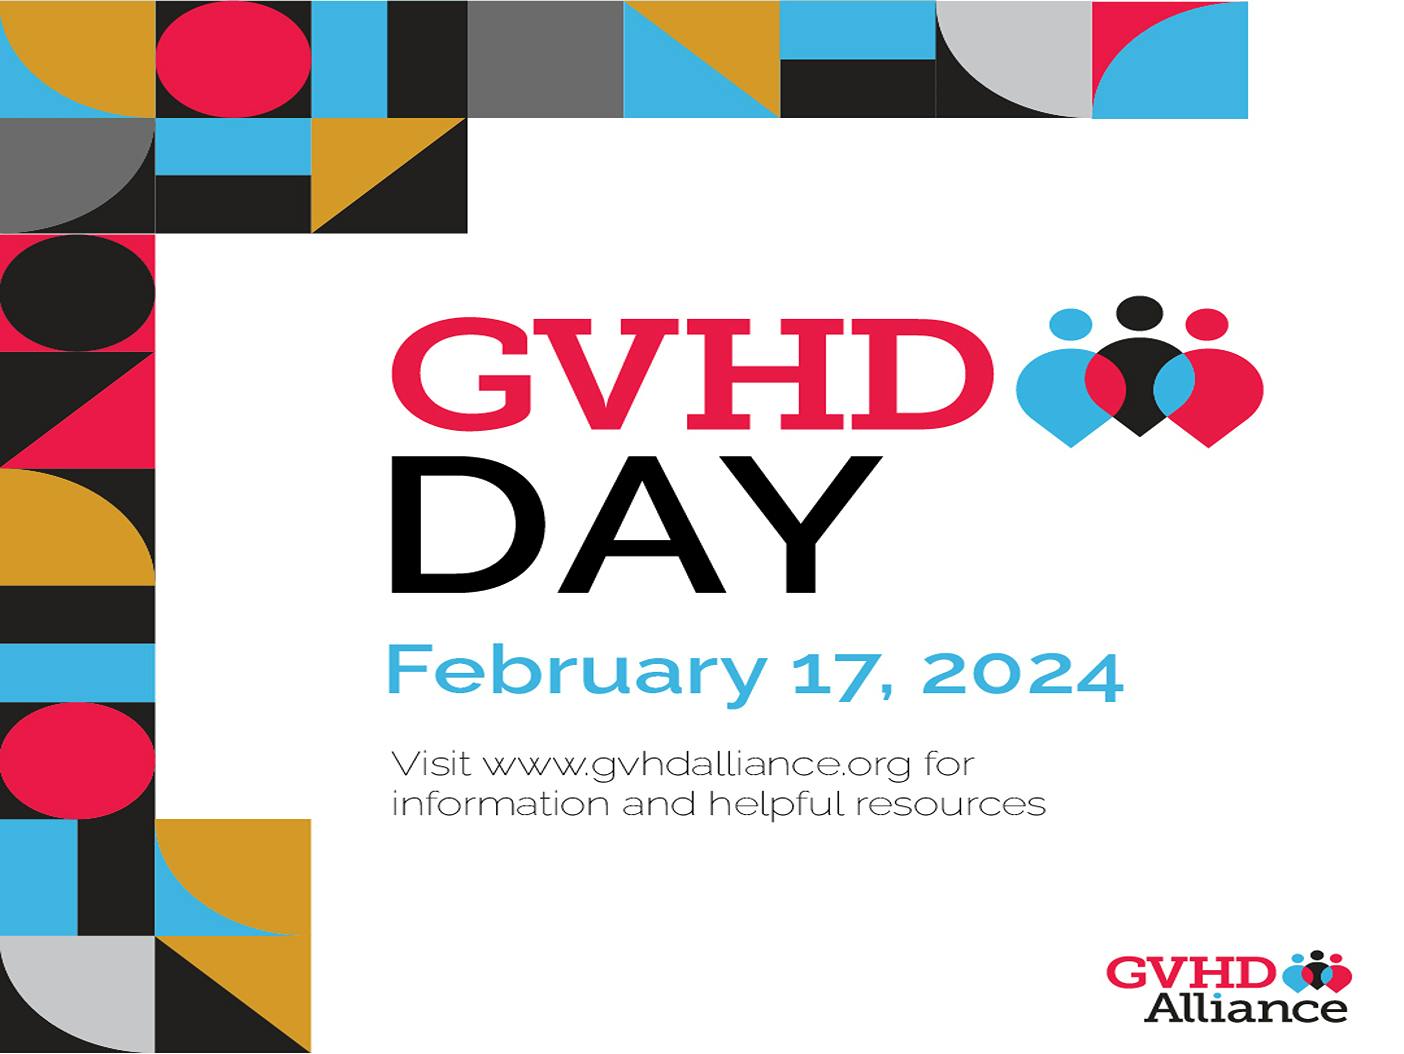 GVHD Day is February 17, 2024. Visit www.gvhdalliance.org for information and helpful resources.